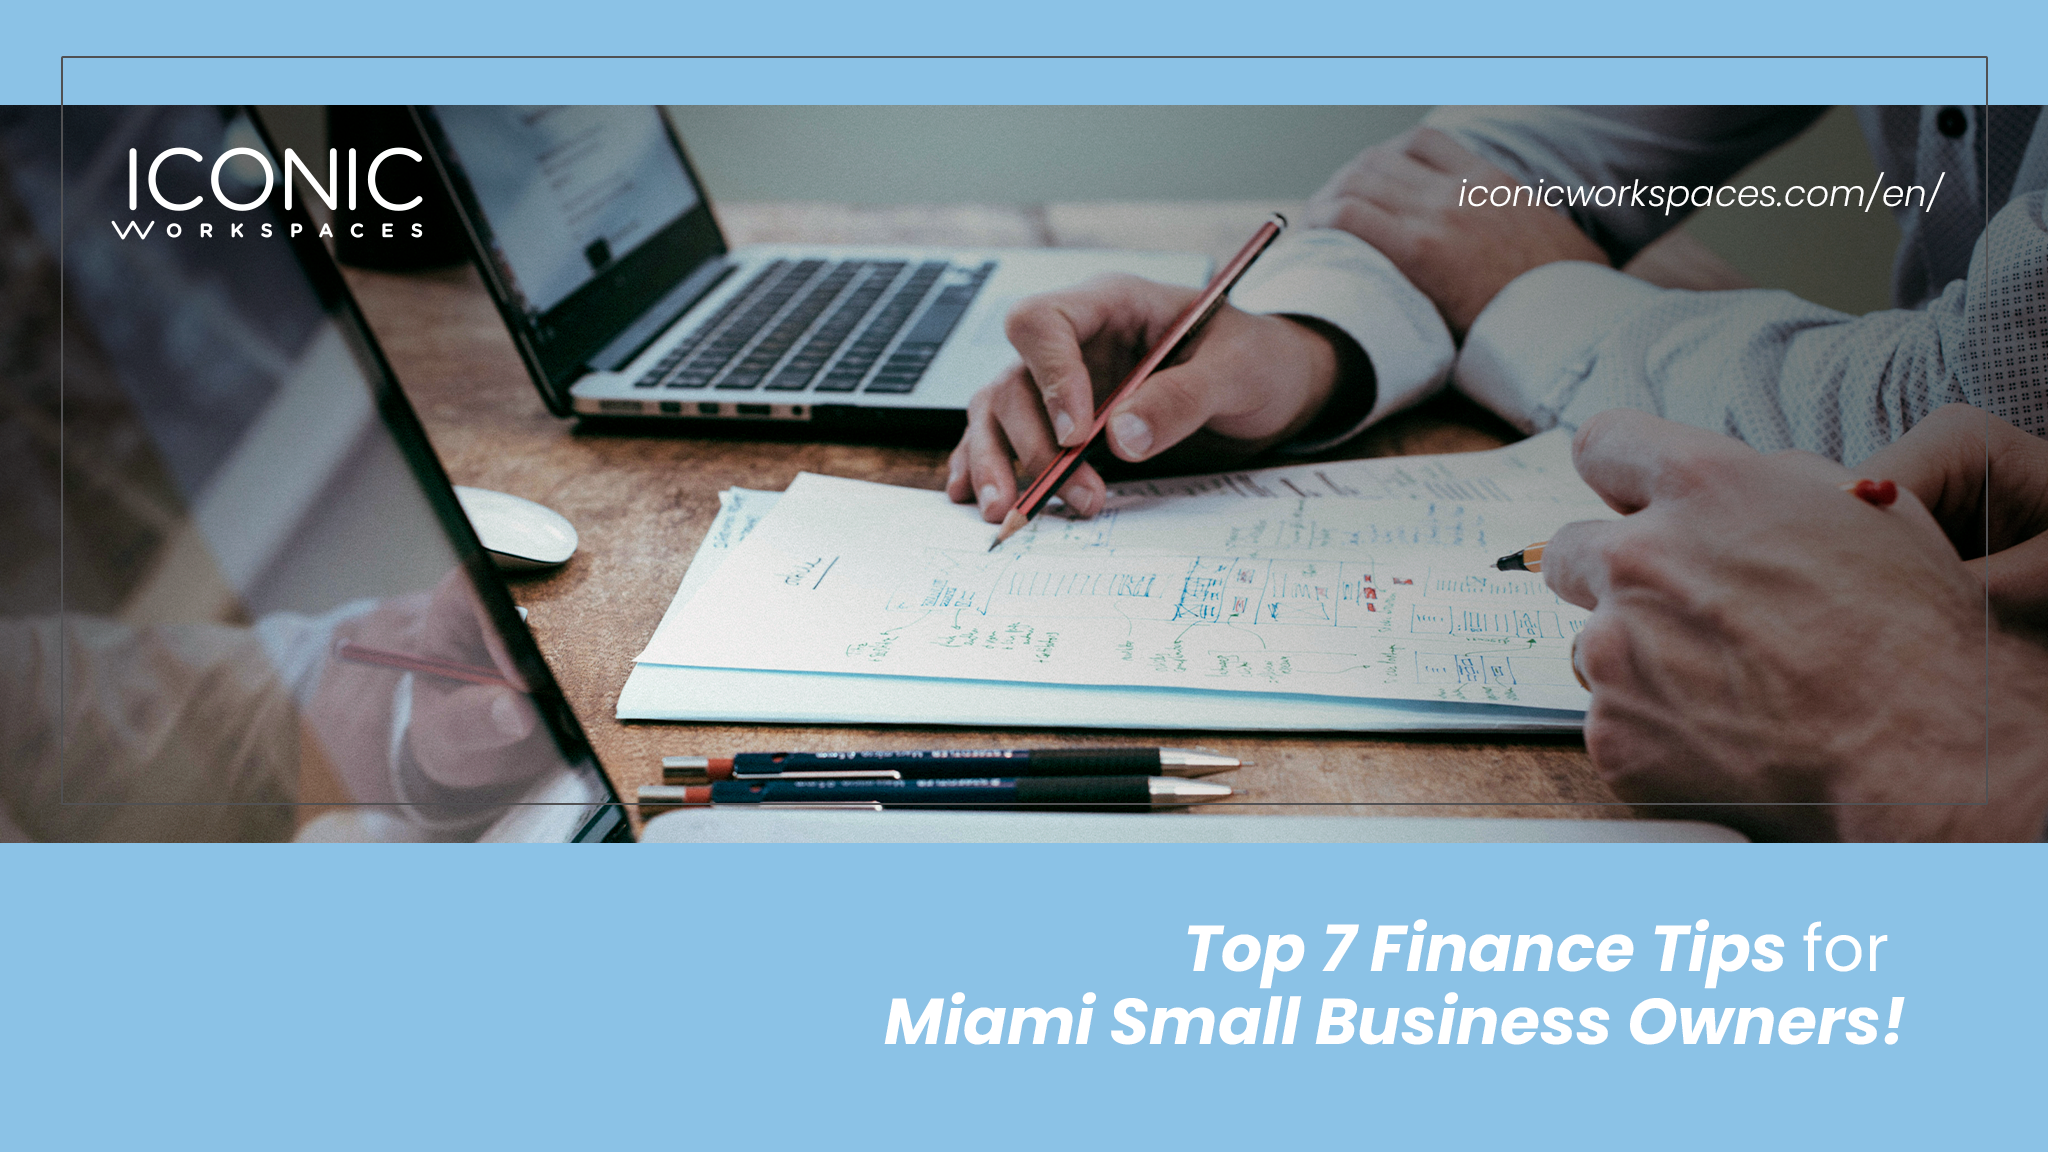 Top 7 Finance Tips for Miami Small Business Owners